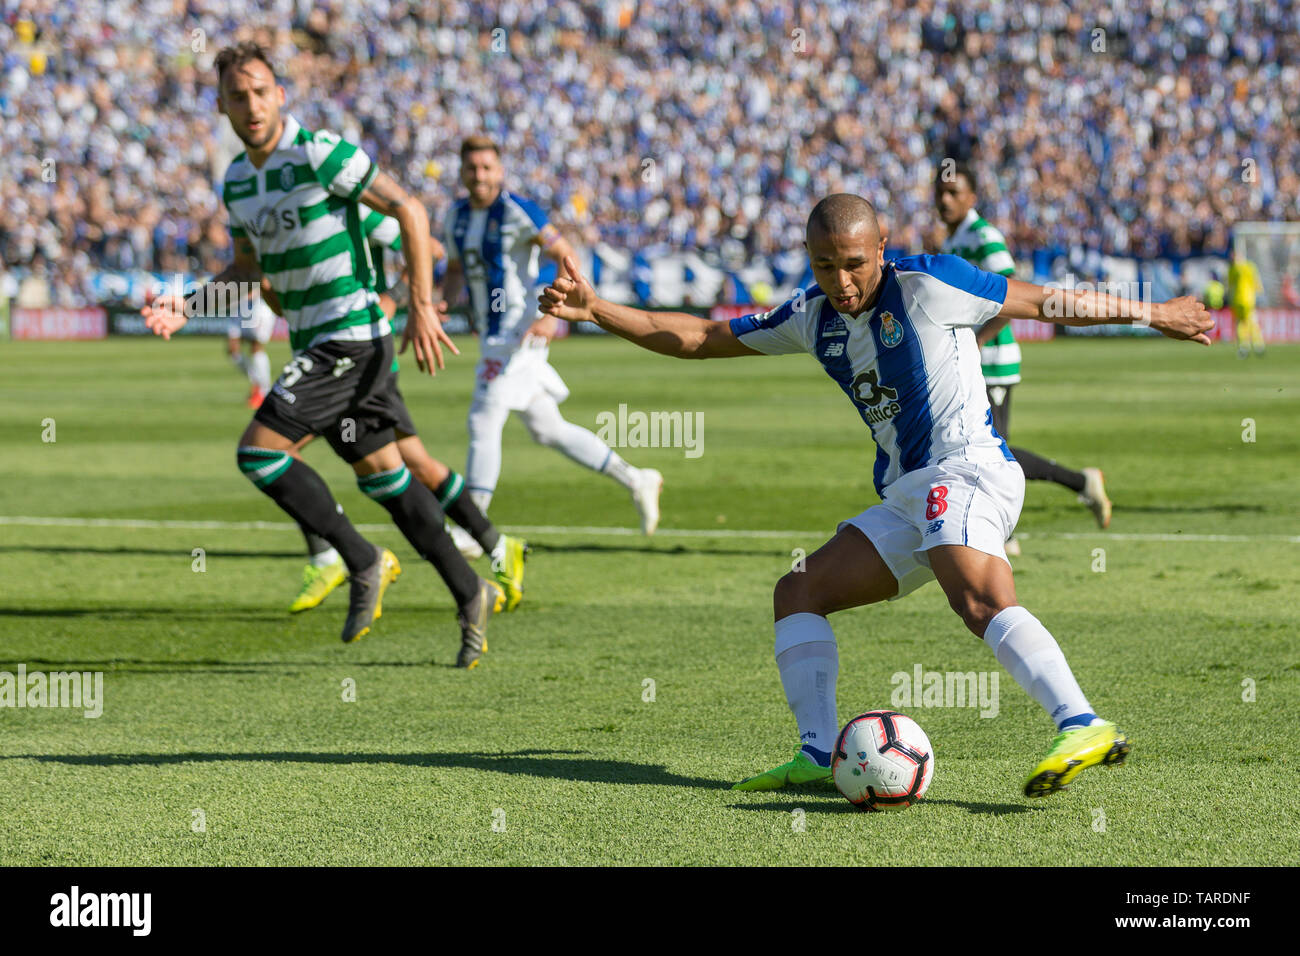 May 25, 2019. Oeiras, Portugal. Porto's forward from Argelia Yacine Brahimi (8) in action during the game Sporting CP vs FC Porto © Alexandre de Sousa/Alamy Live News Stock Photo